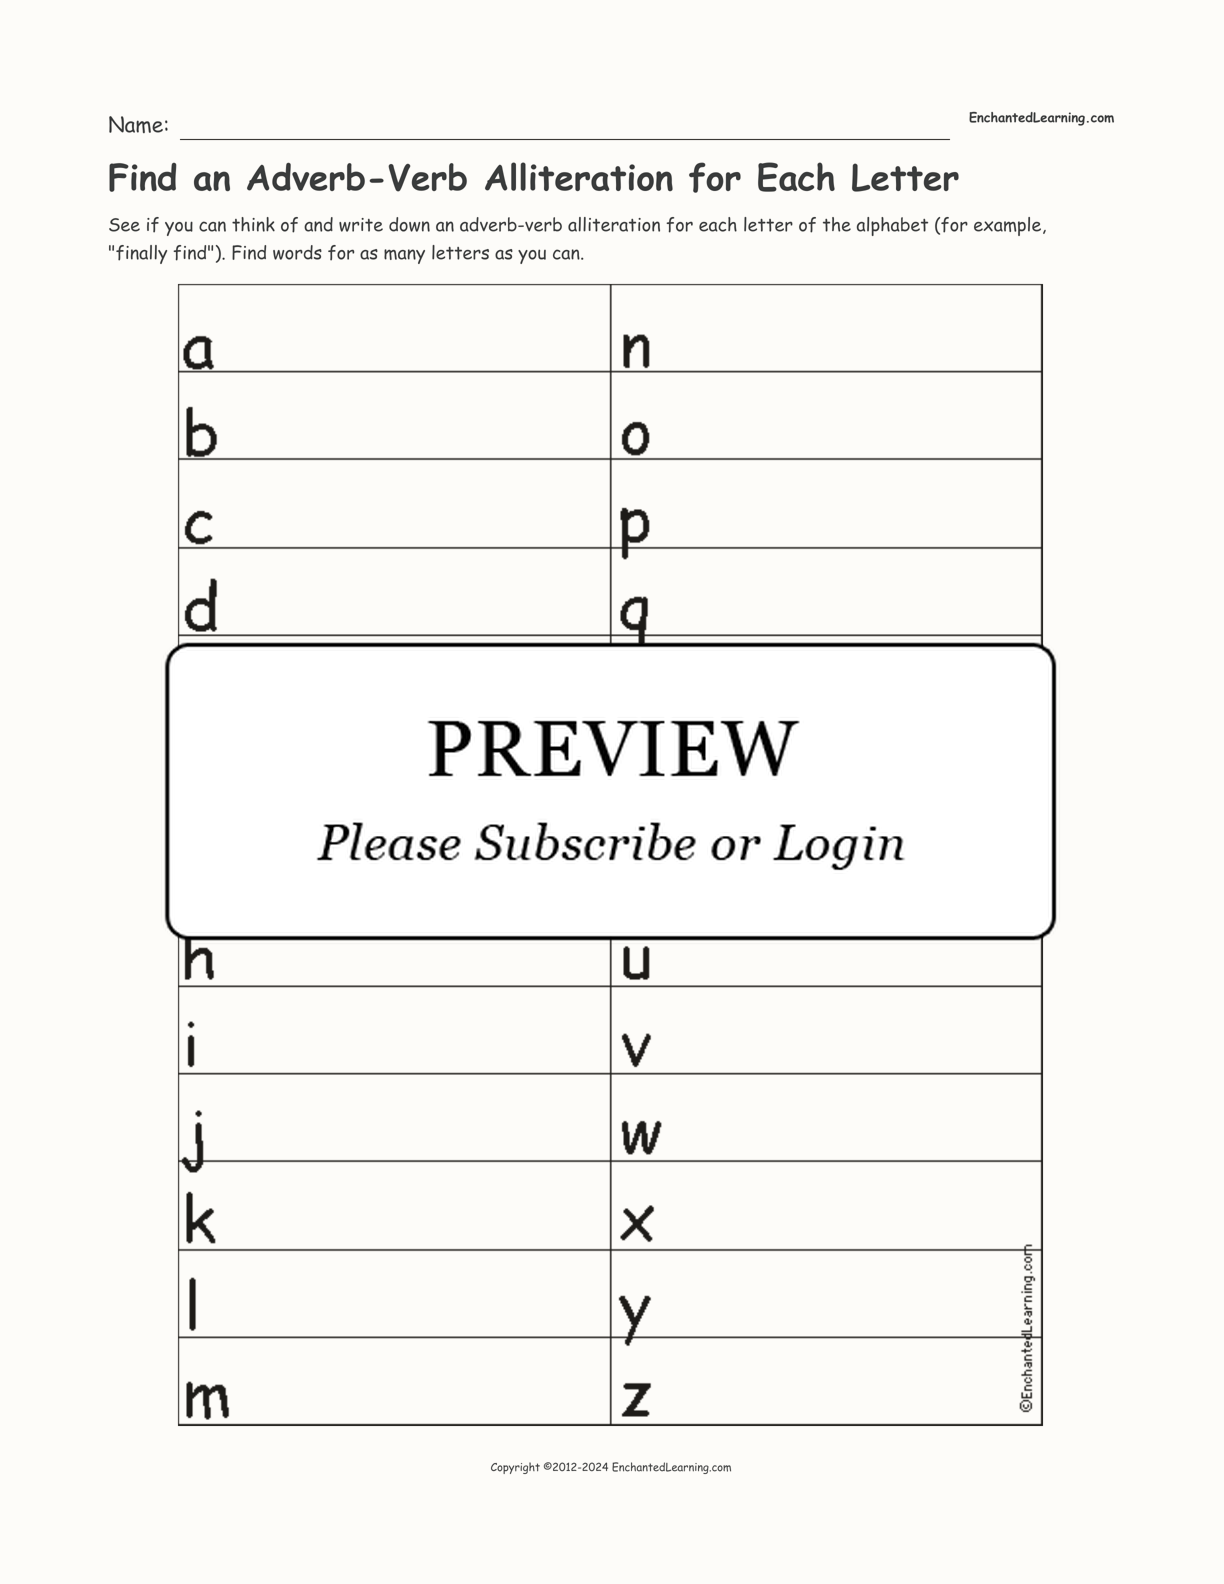 Find an Adverb-Verb Alliteration for Each Letter interactive worksheet page 1